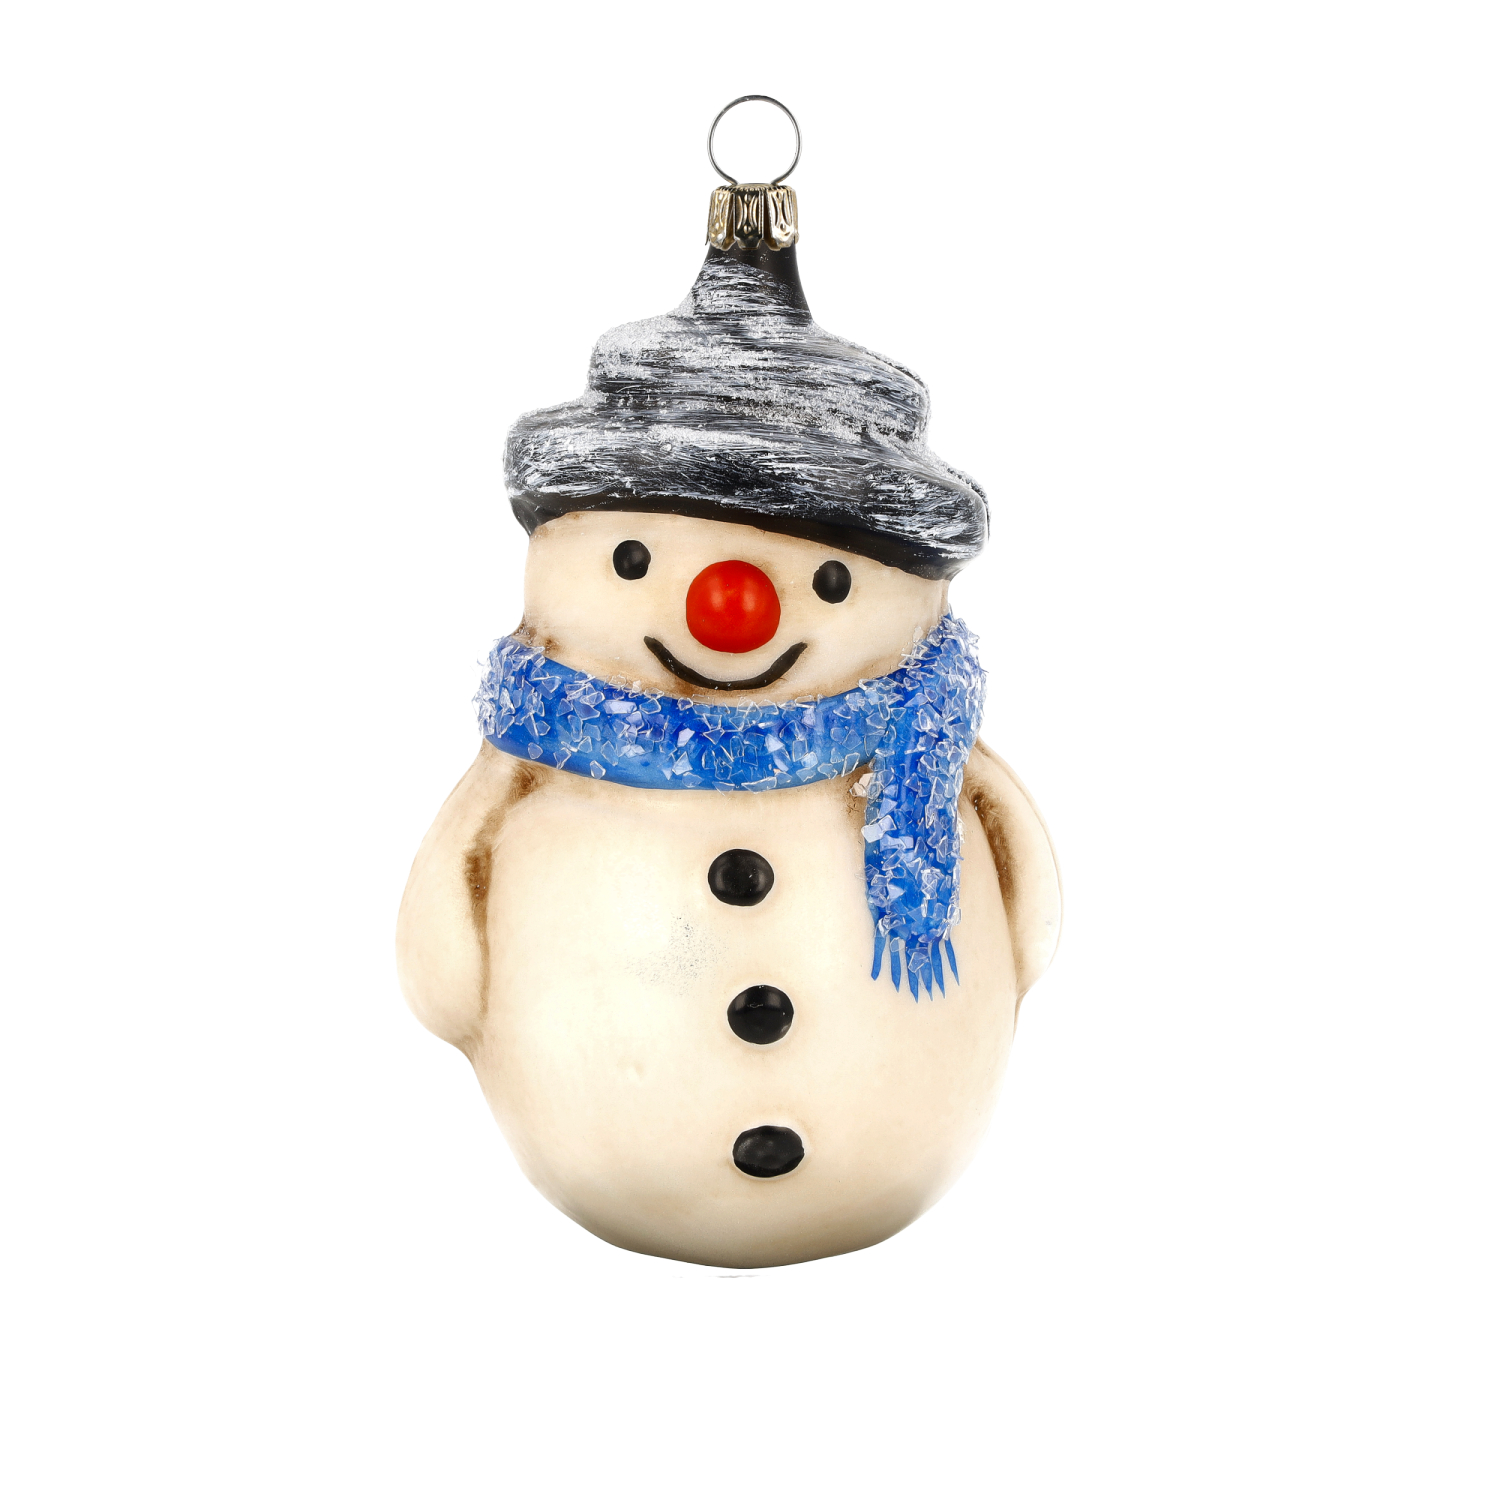 Glass ornament "Large snowman with a scarf"